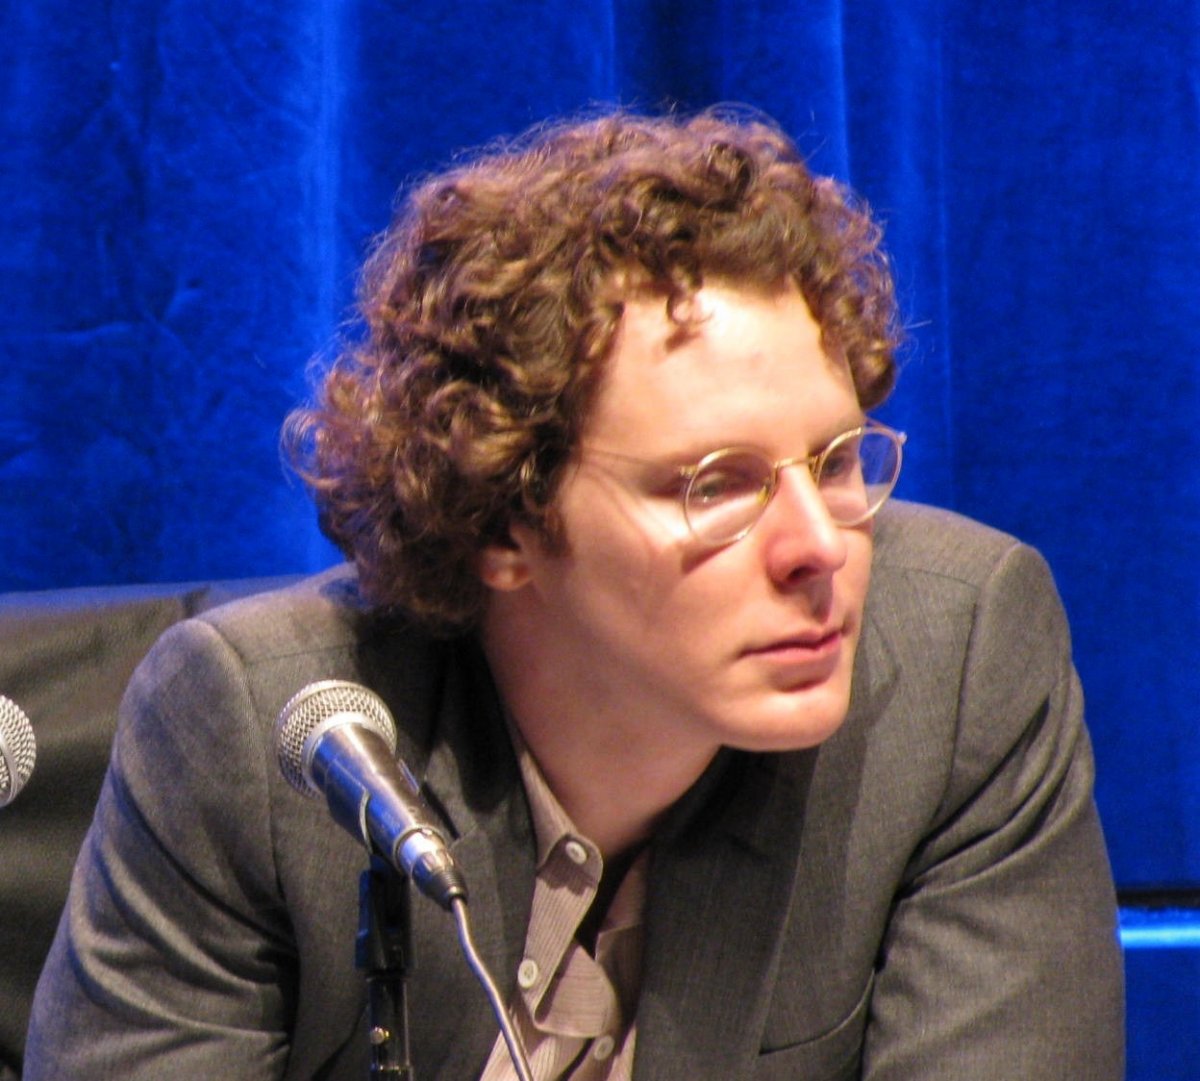 In mid-2004, Zuckerberg hired Napster cofounder Sean Parker as the company's first president.